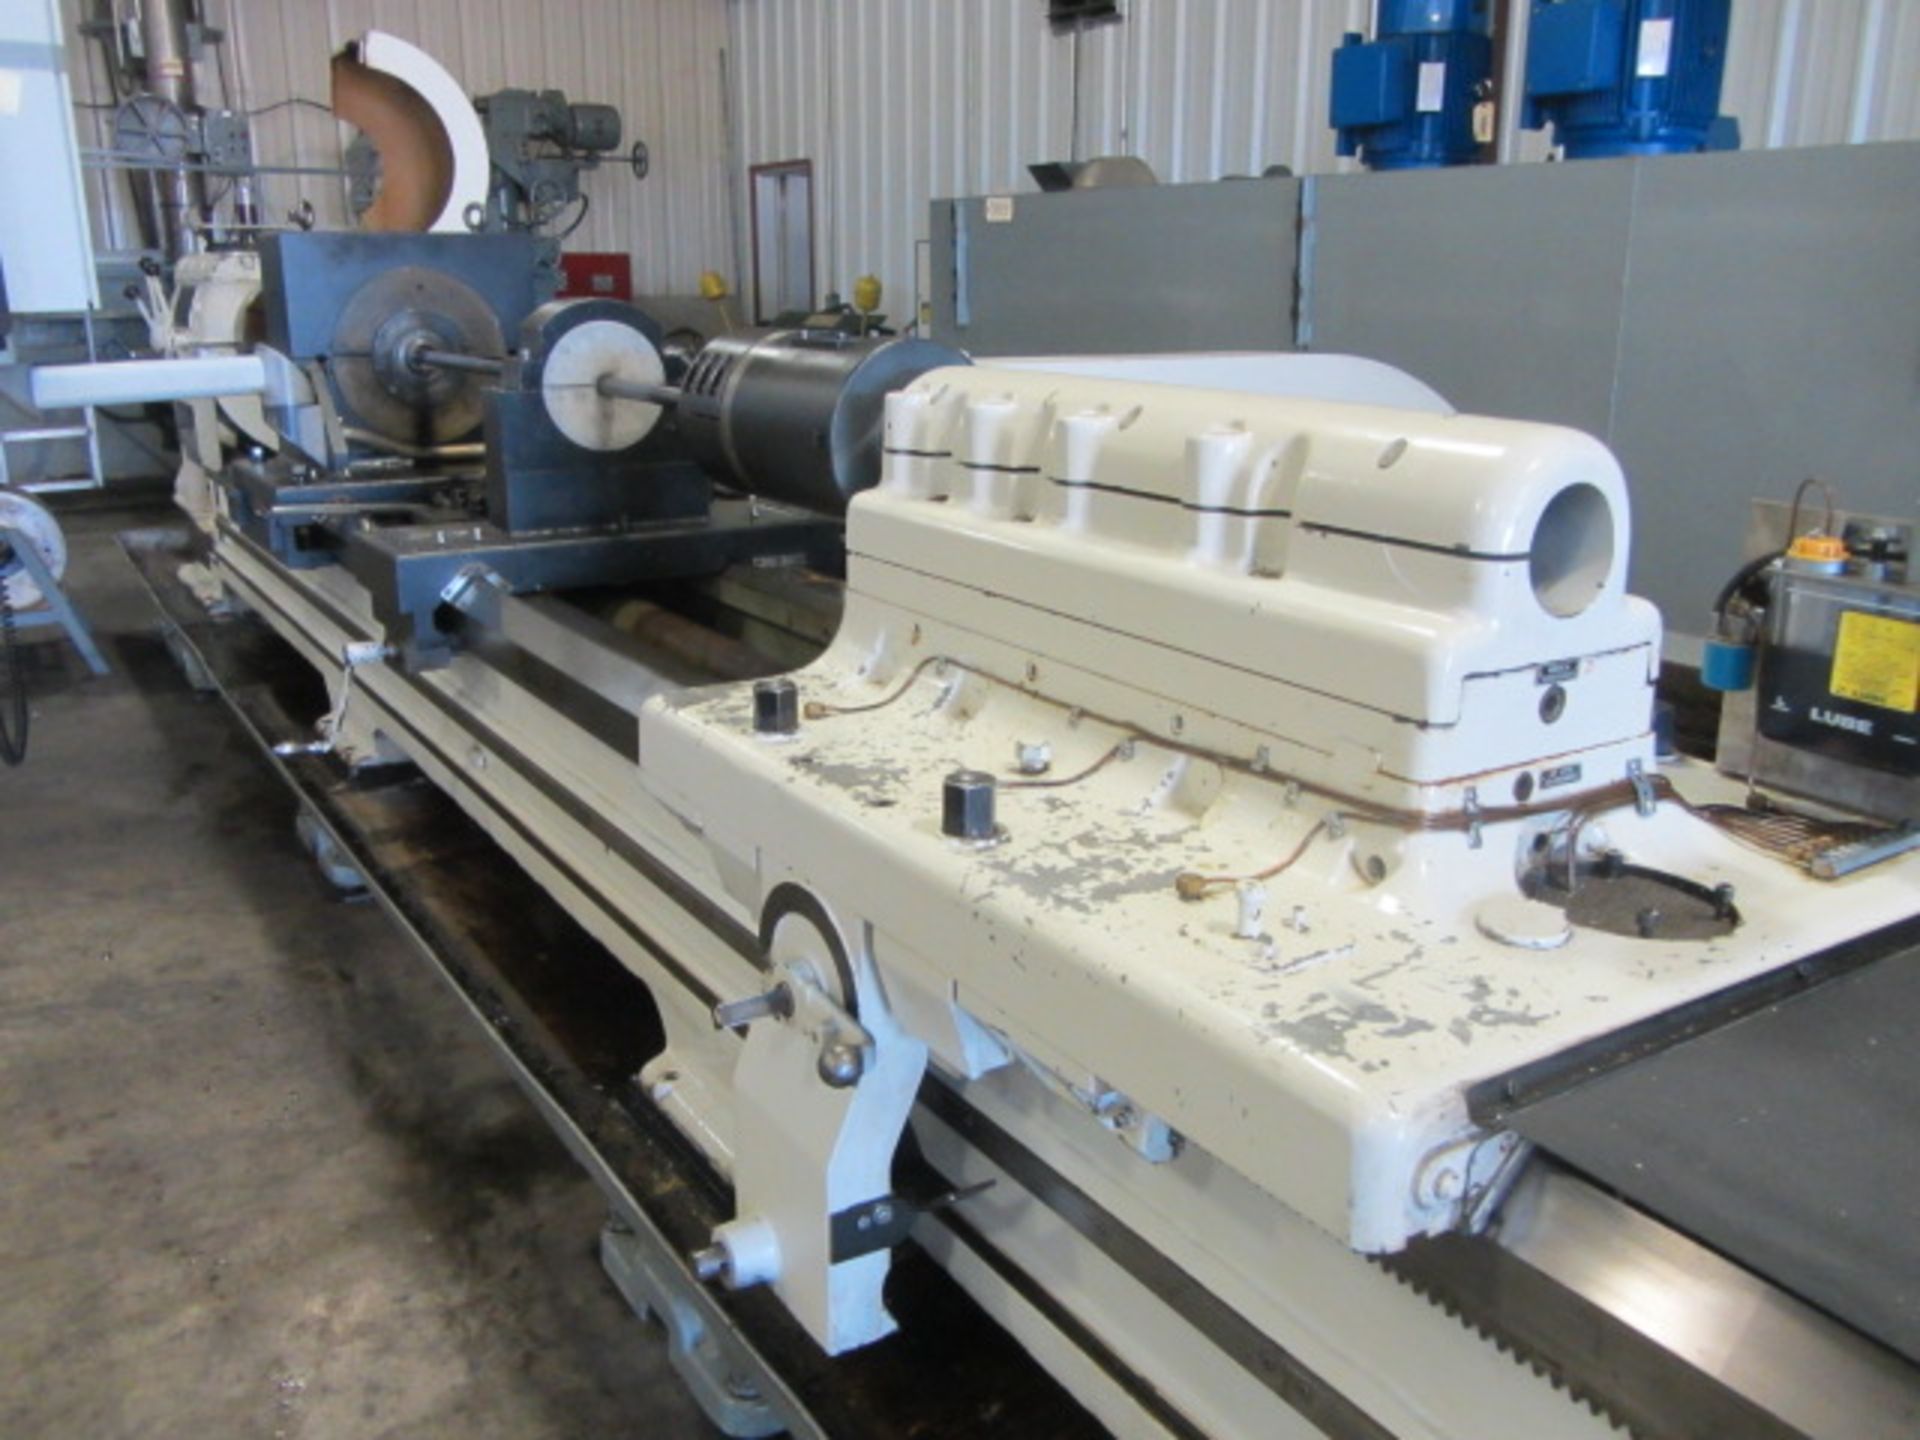 Sig/Axelson CNC Deep Hole / Trepanning / Ejector Drilling Machine with up to 27' Maximum Bed Length, - Image 5 of 10